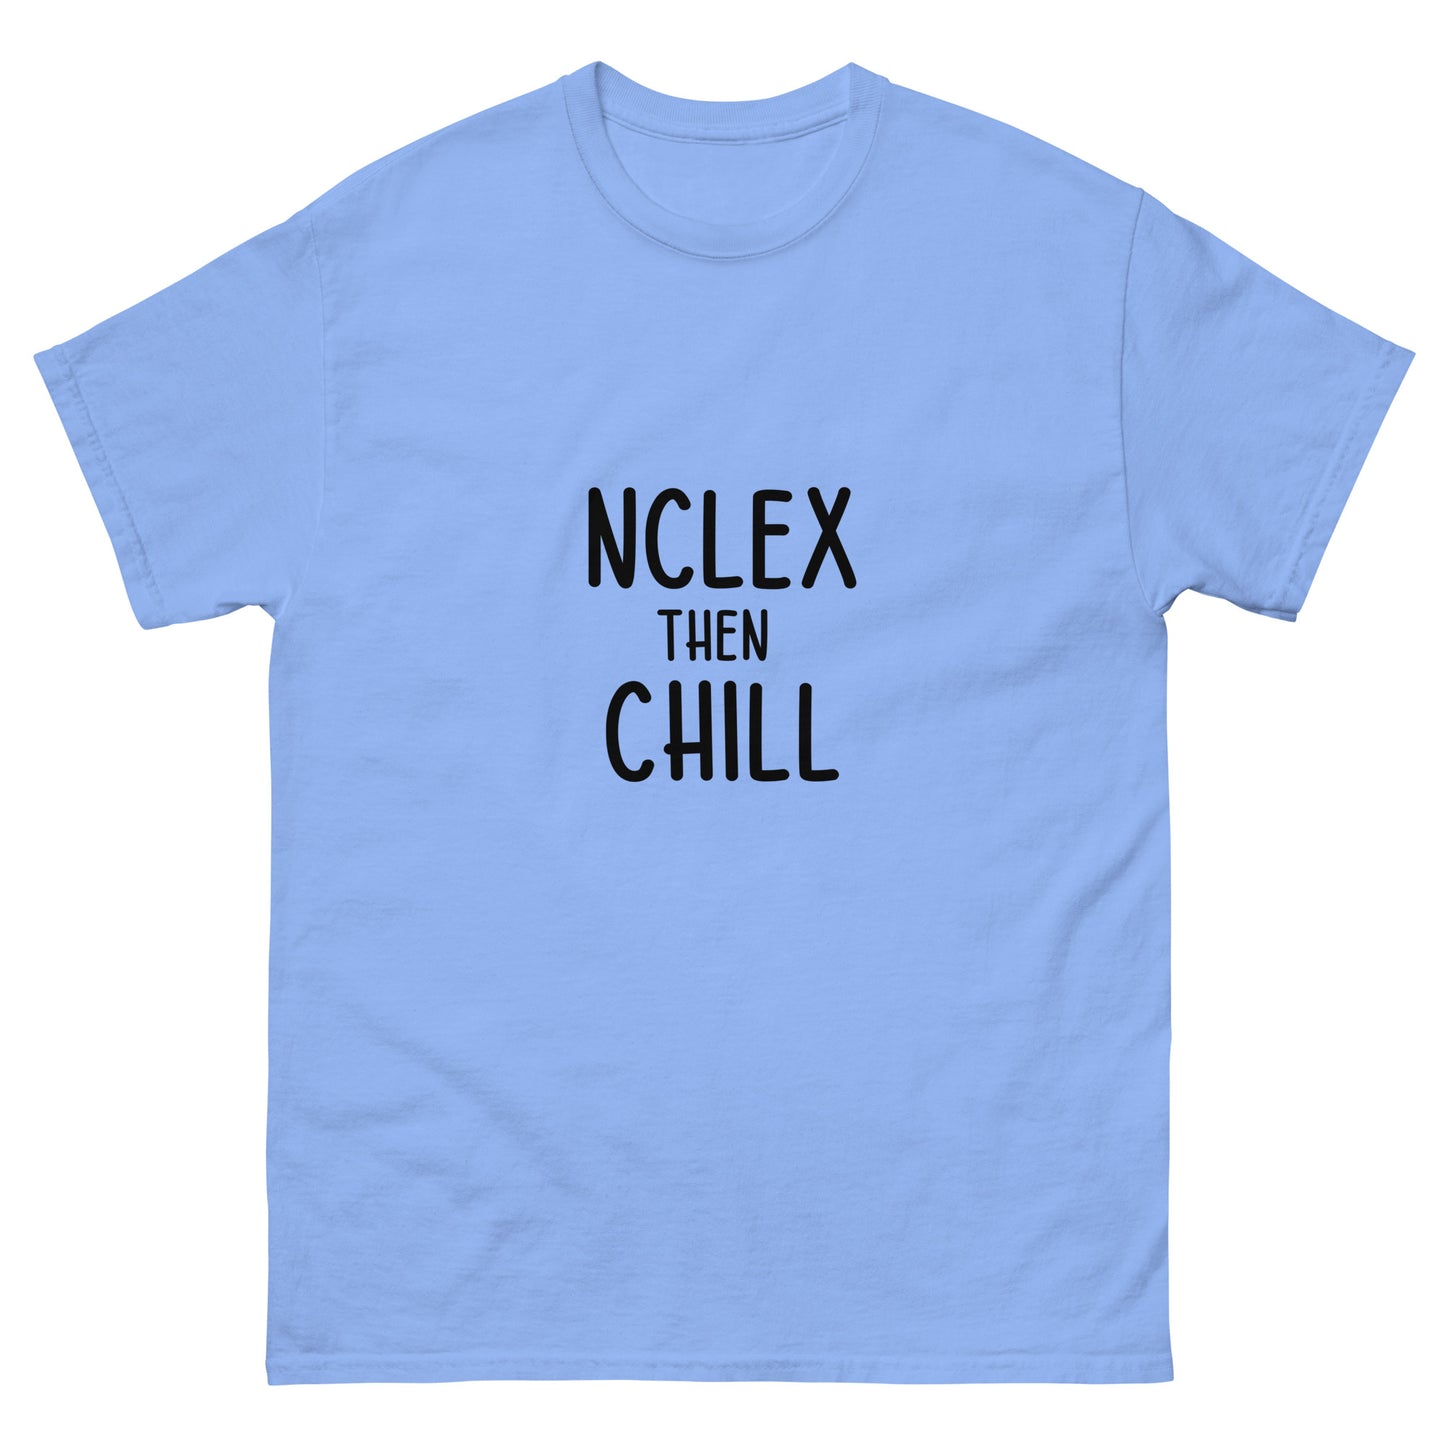 NCLEX and chill classic tee